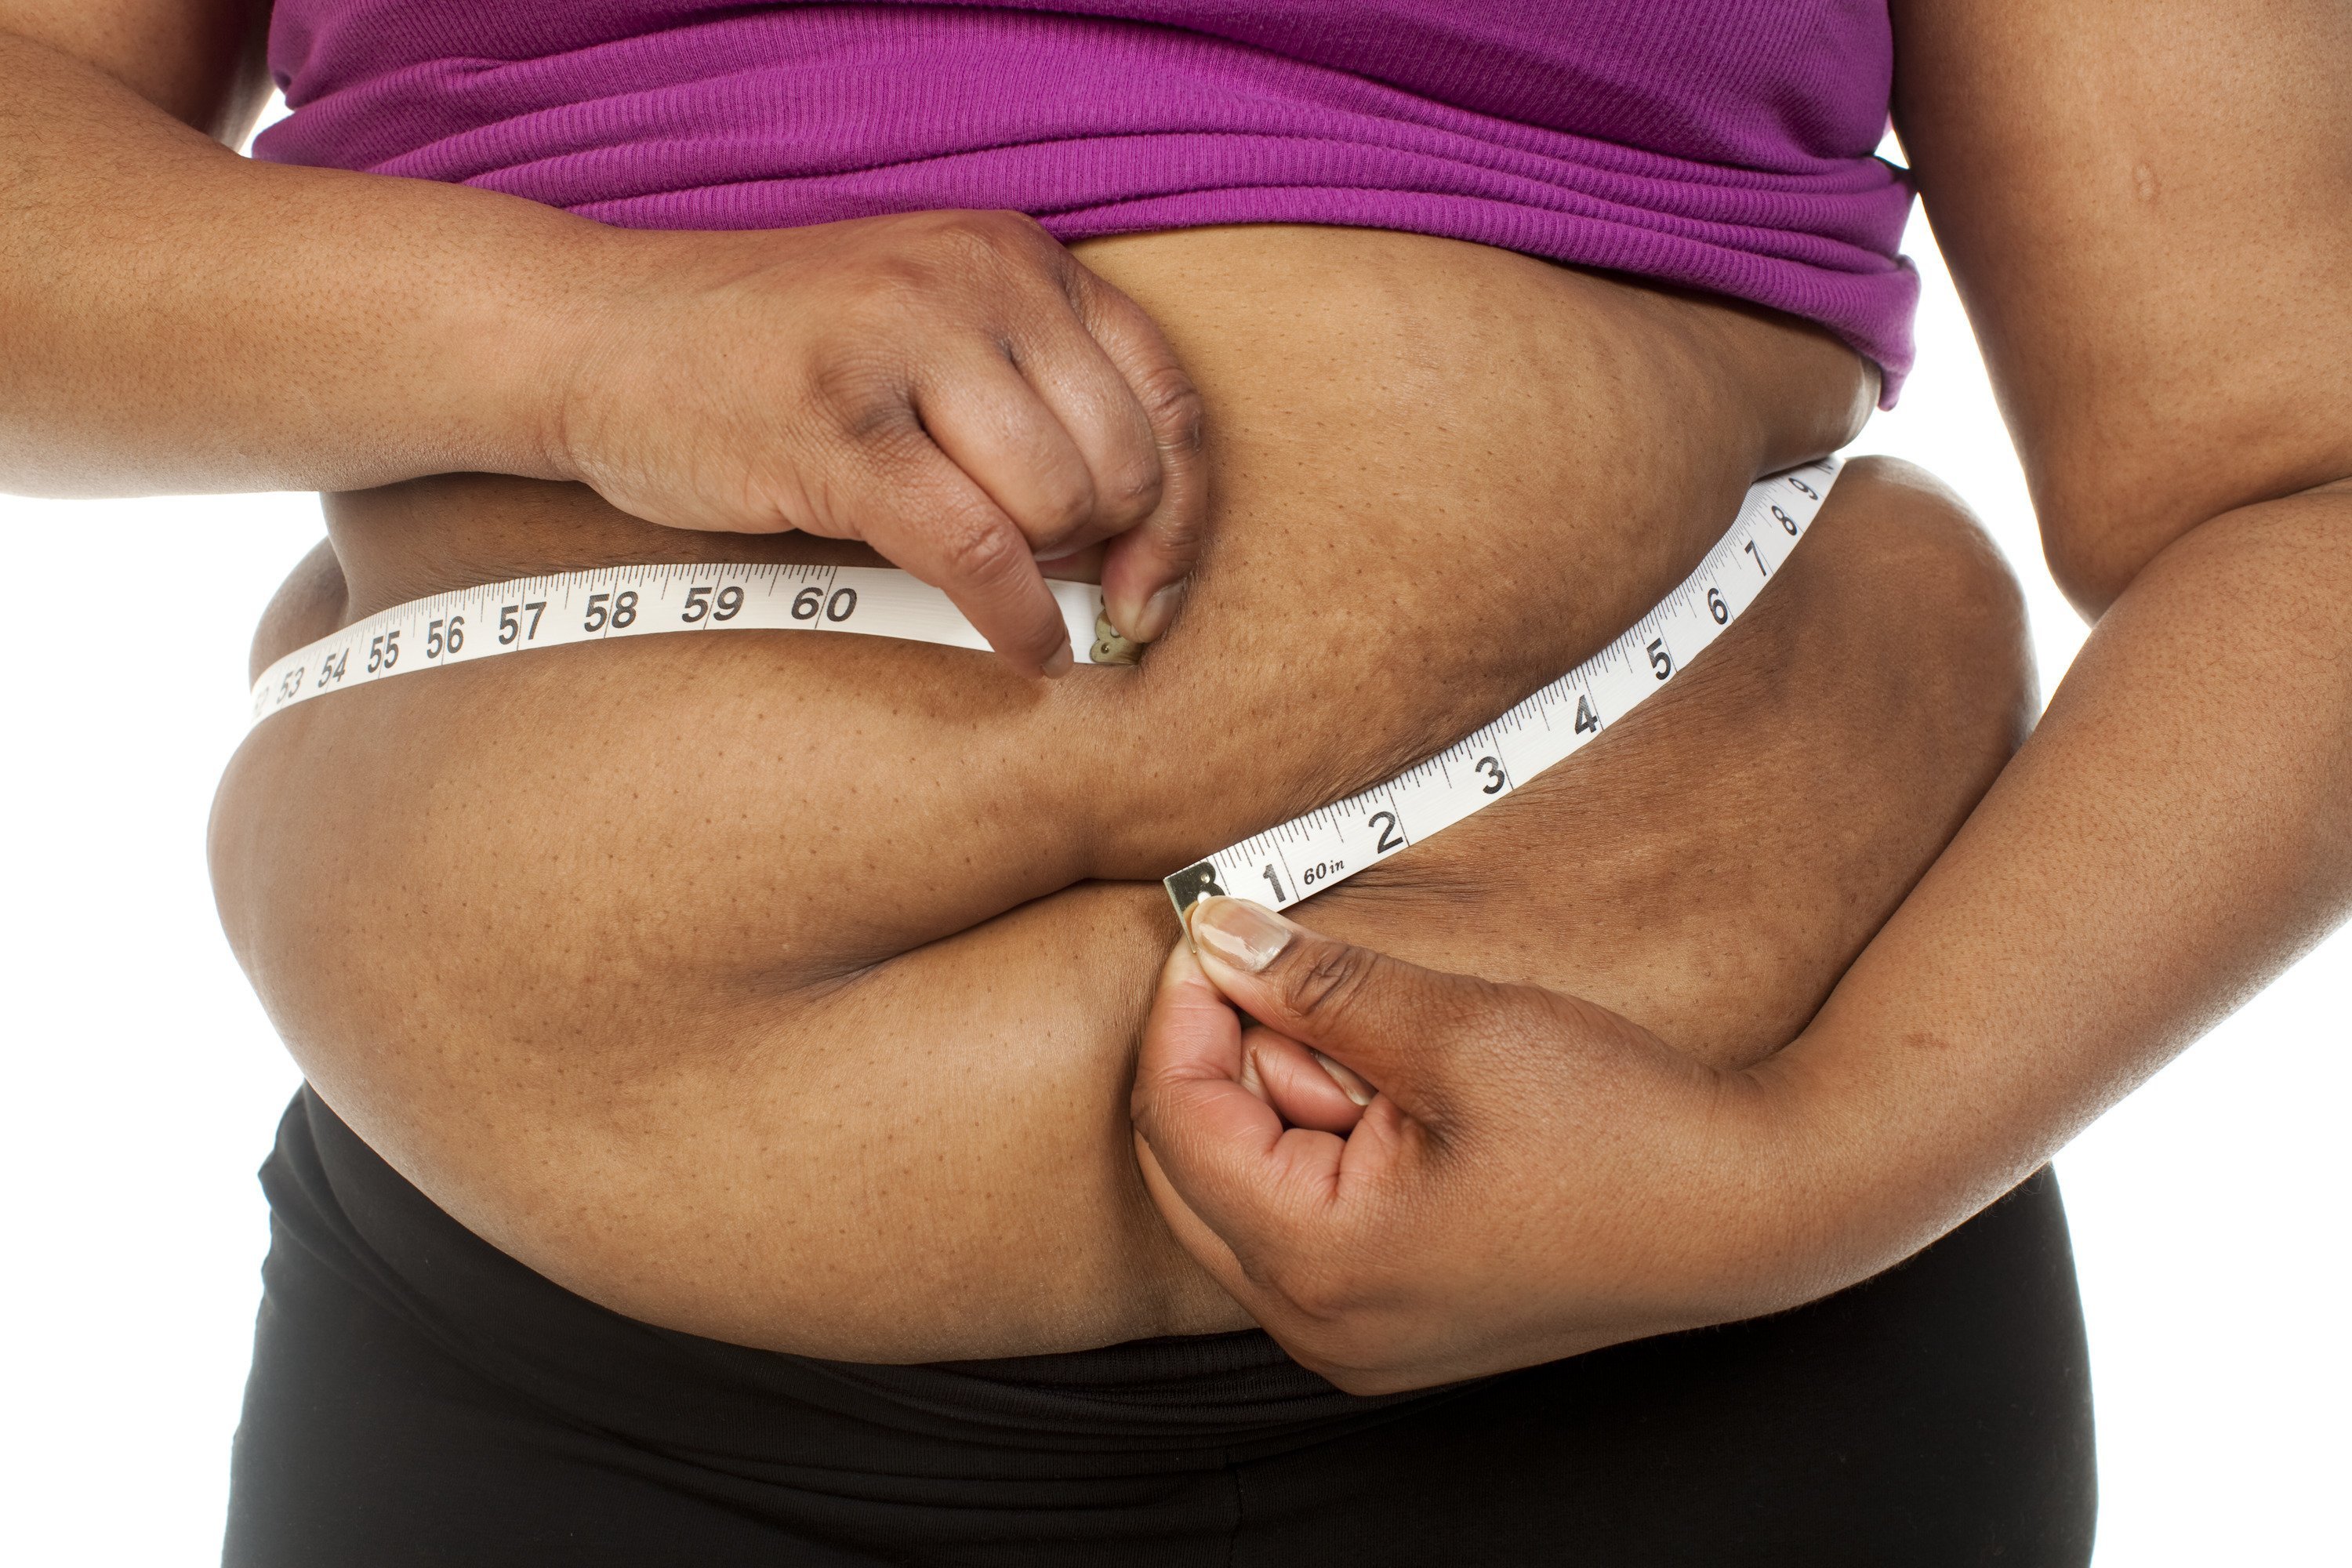 [FILE] A stock photograph detailing the midsection or belly an unidentified obese woman.